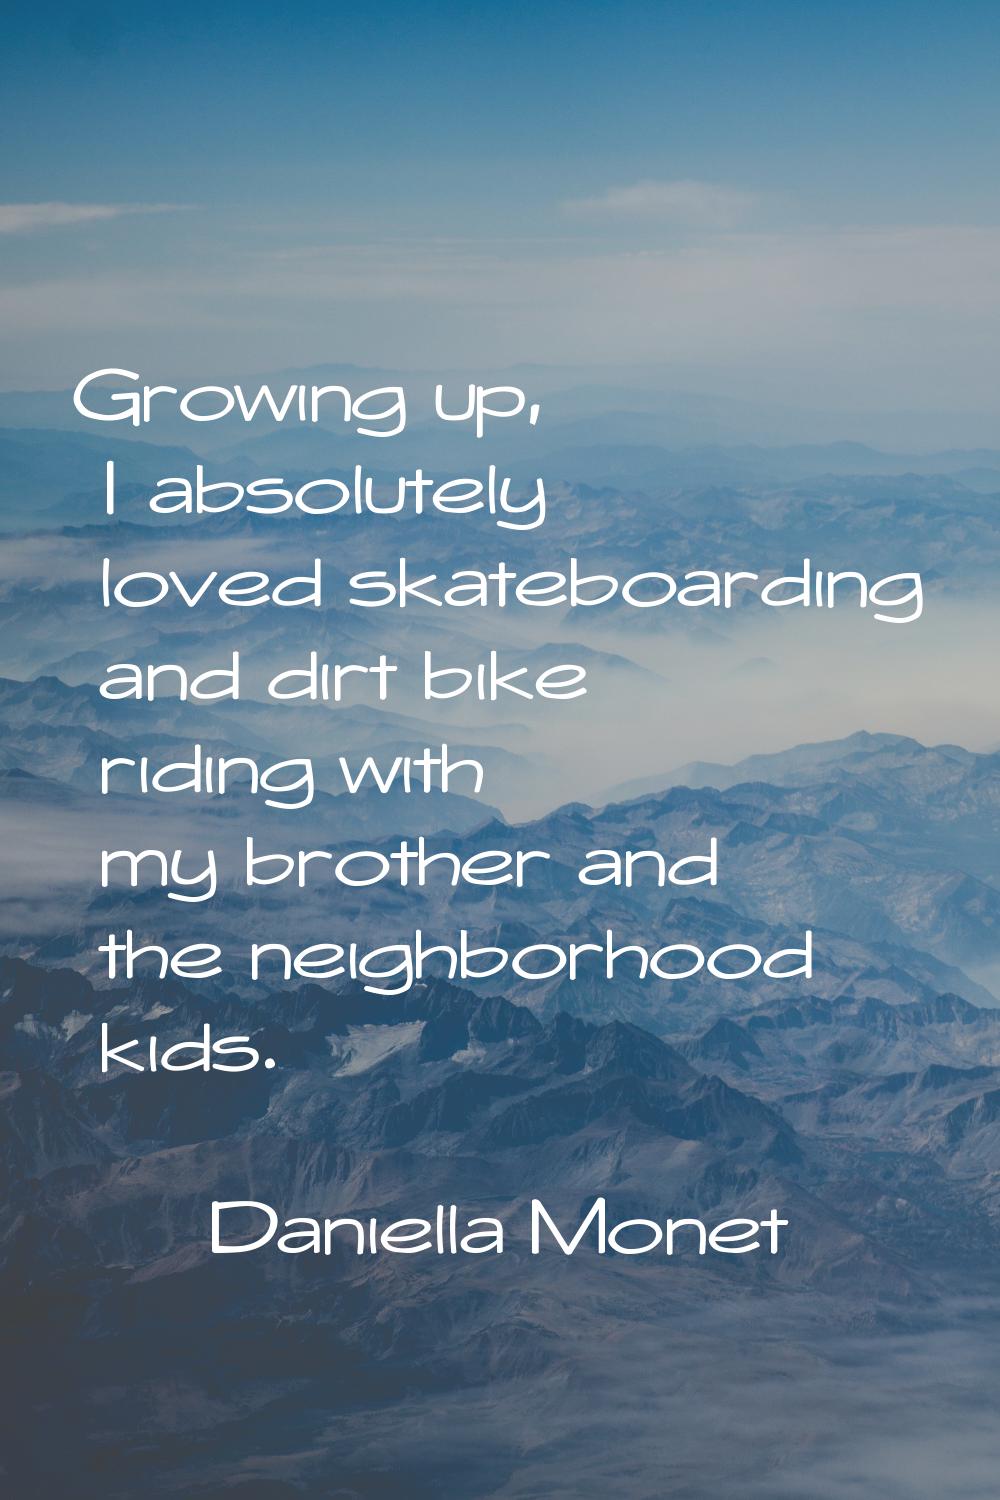 Growing up, I absolutely loved skateboarding and dirt bike riding with my brother and the neighborh